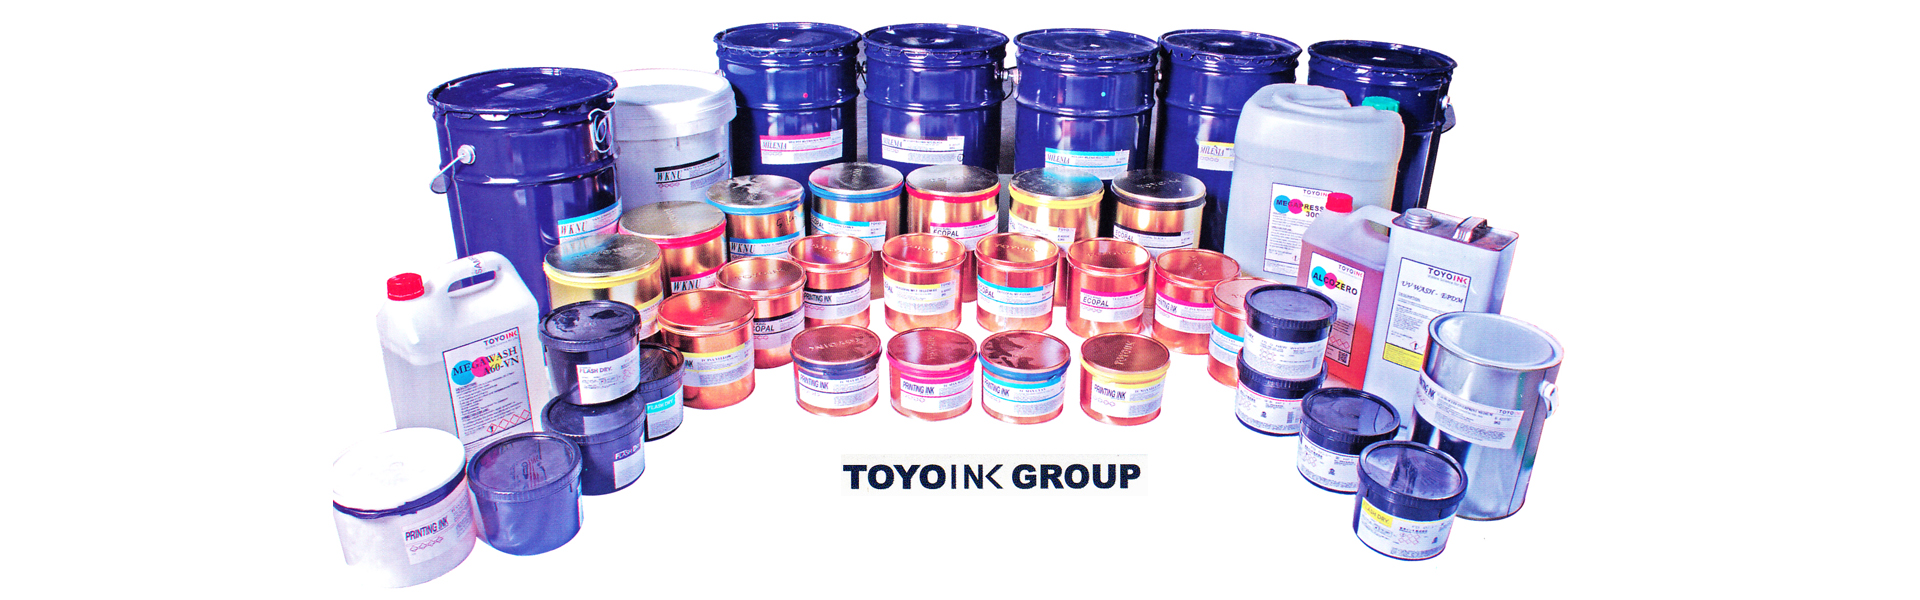 Toyo Ink Products